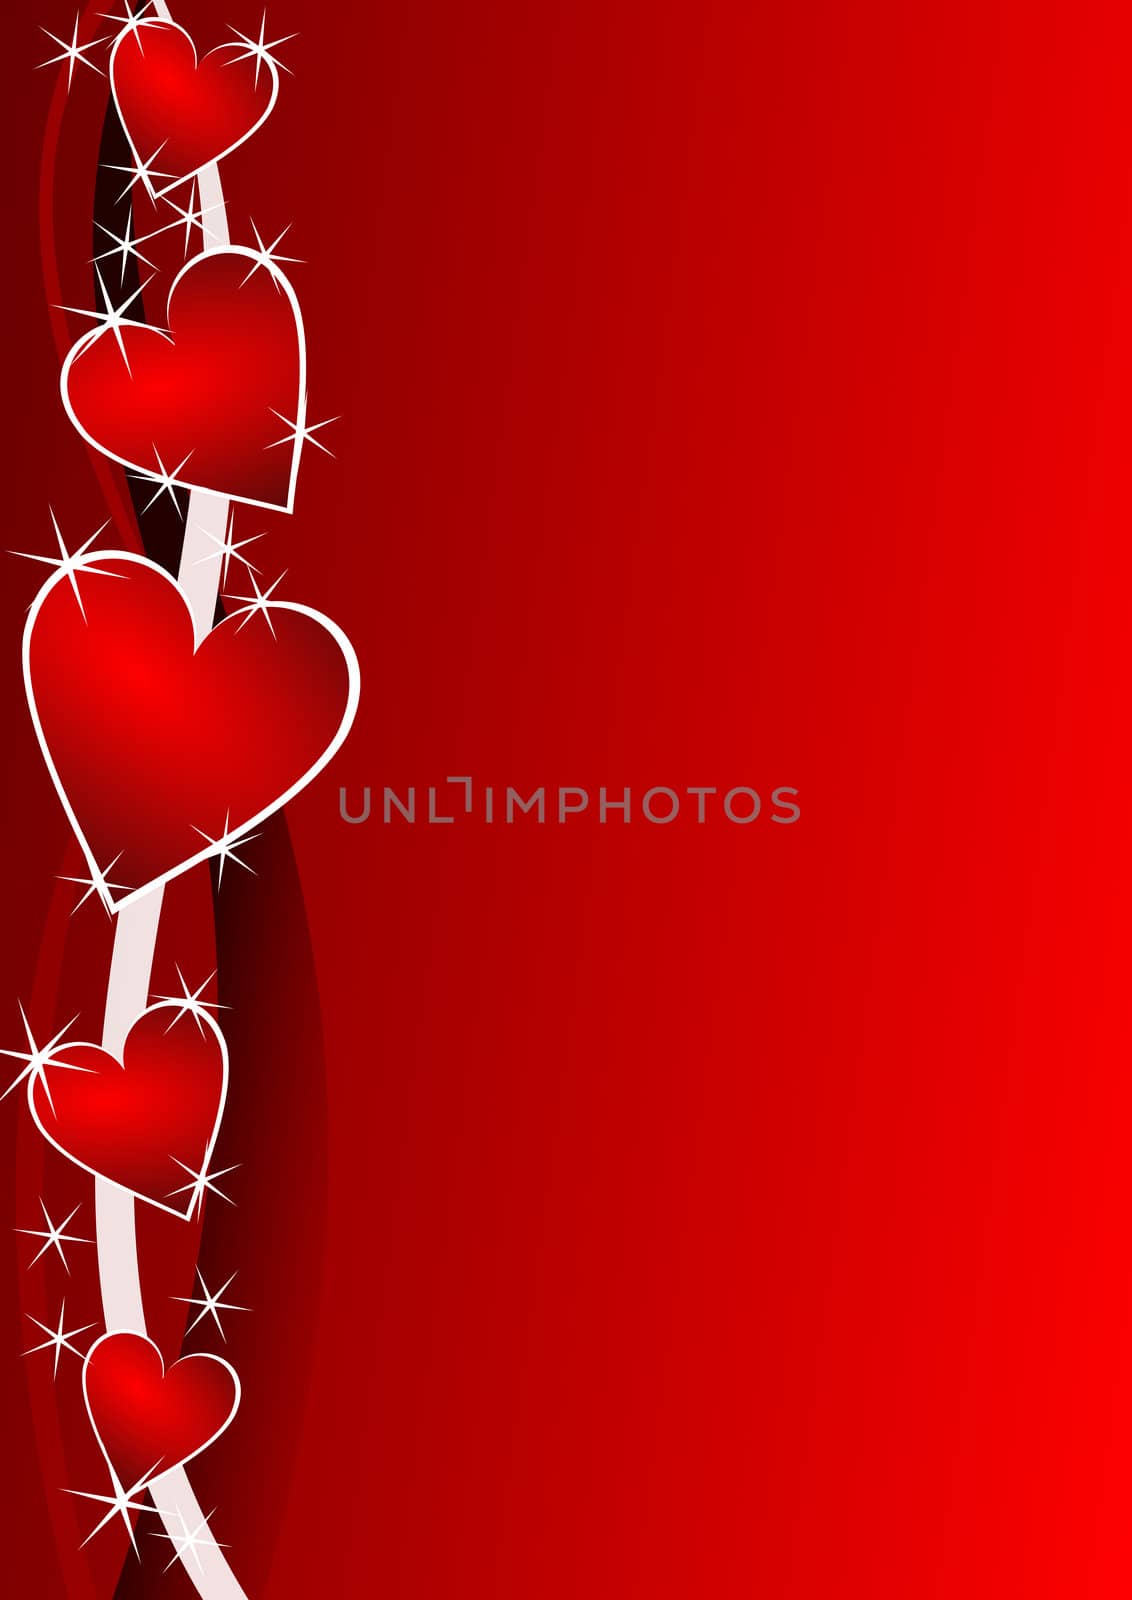 valentines background with hearts by alexwhite